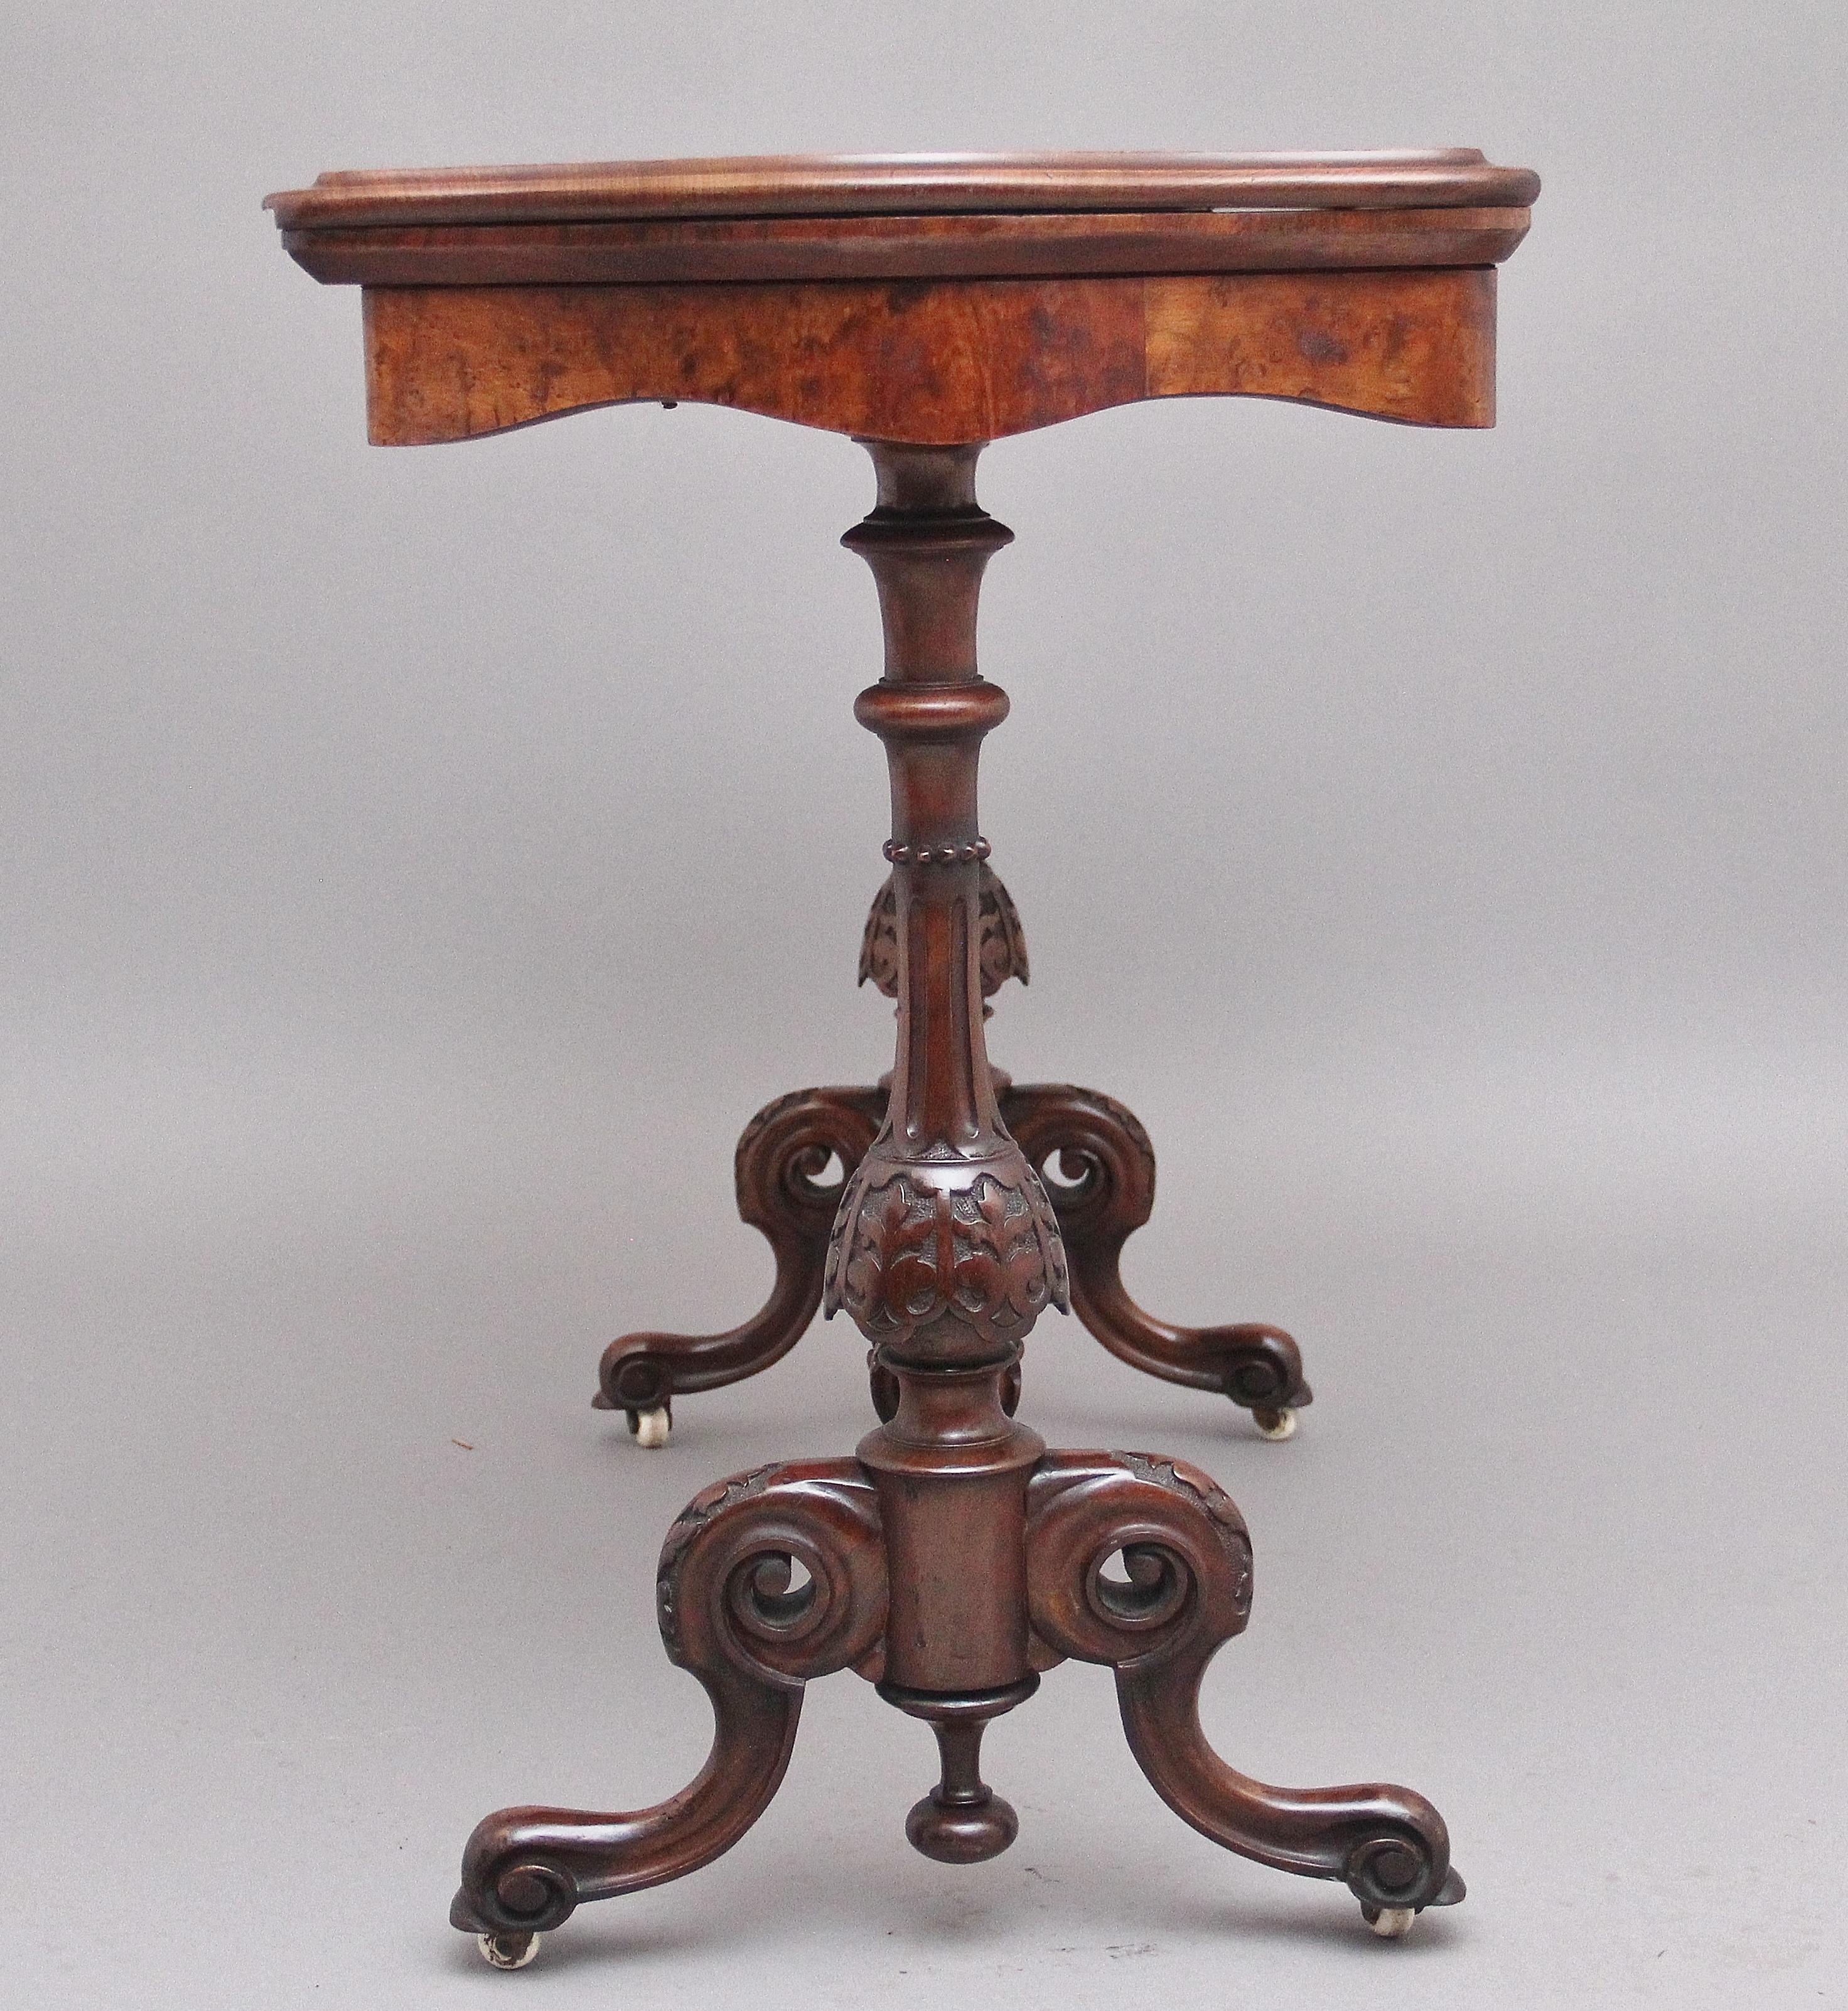 19th Century Antique Burr Walnut Card Table In Good Condition For Sale In Martlesham, GB